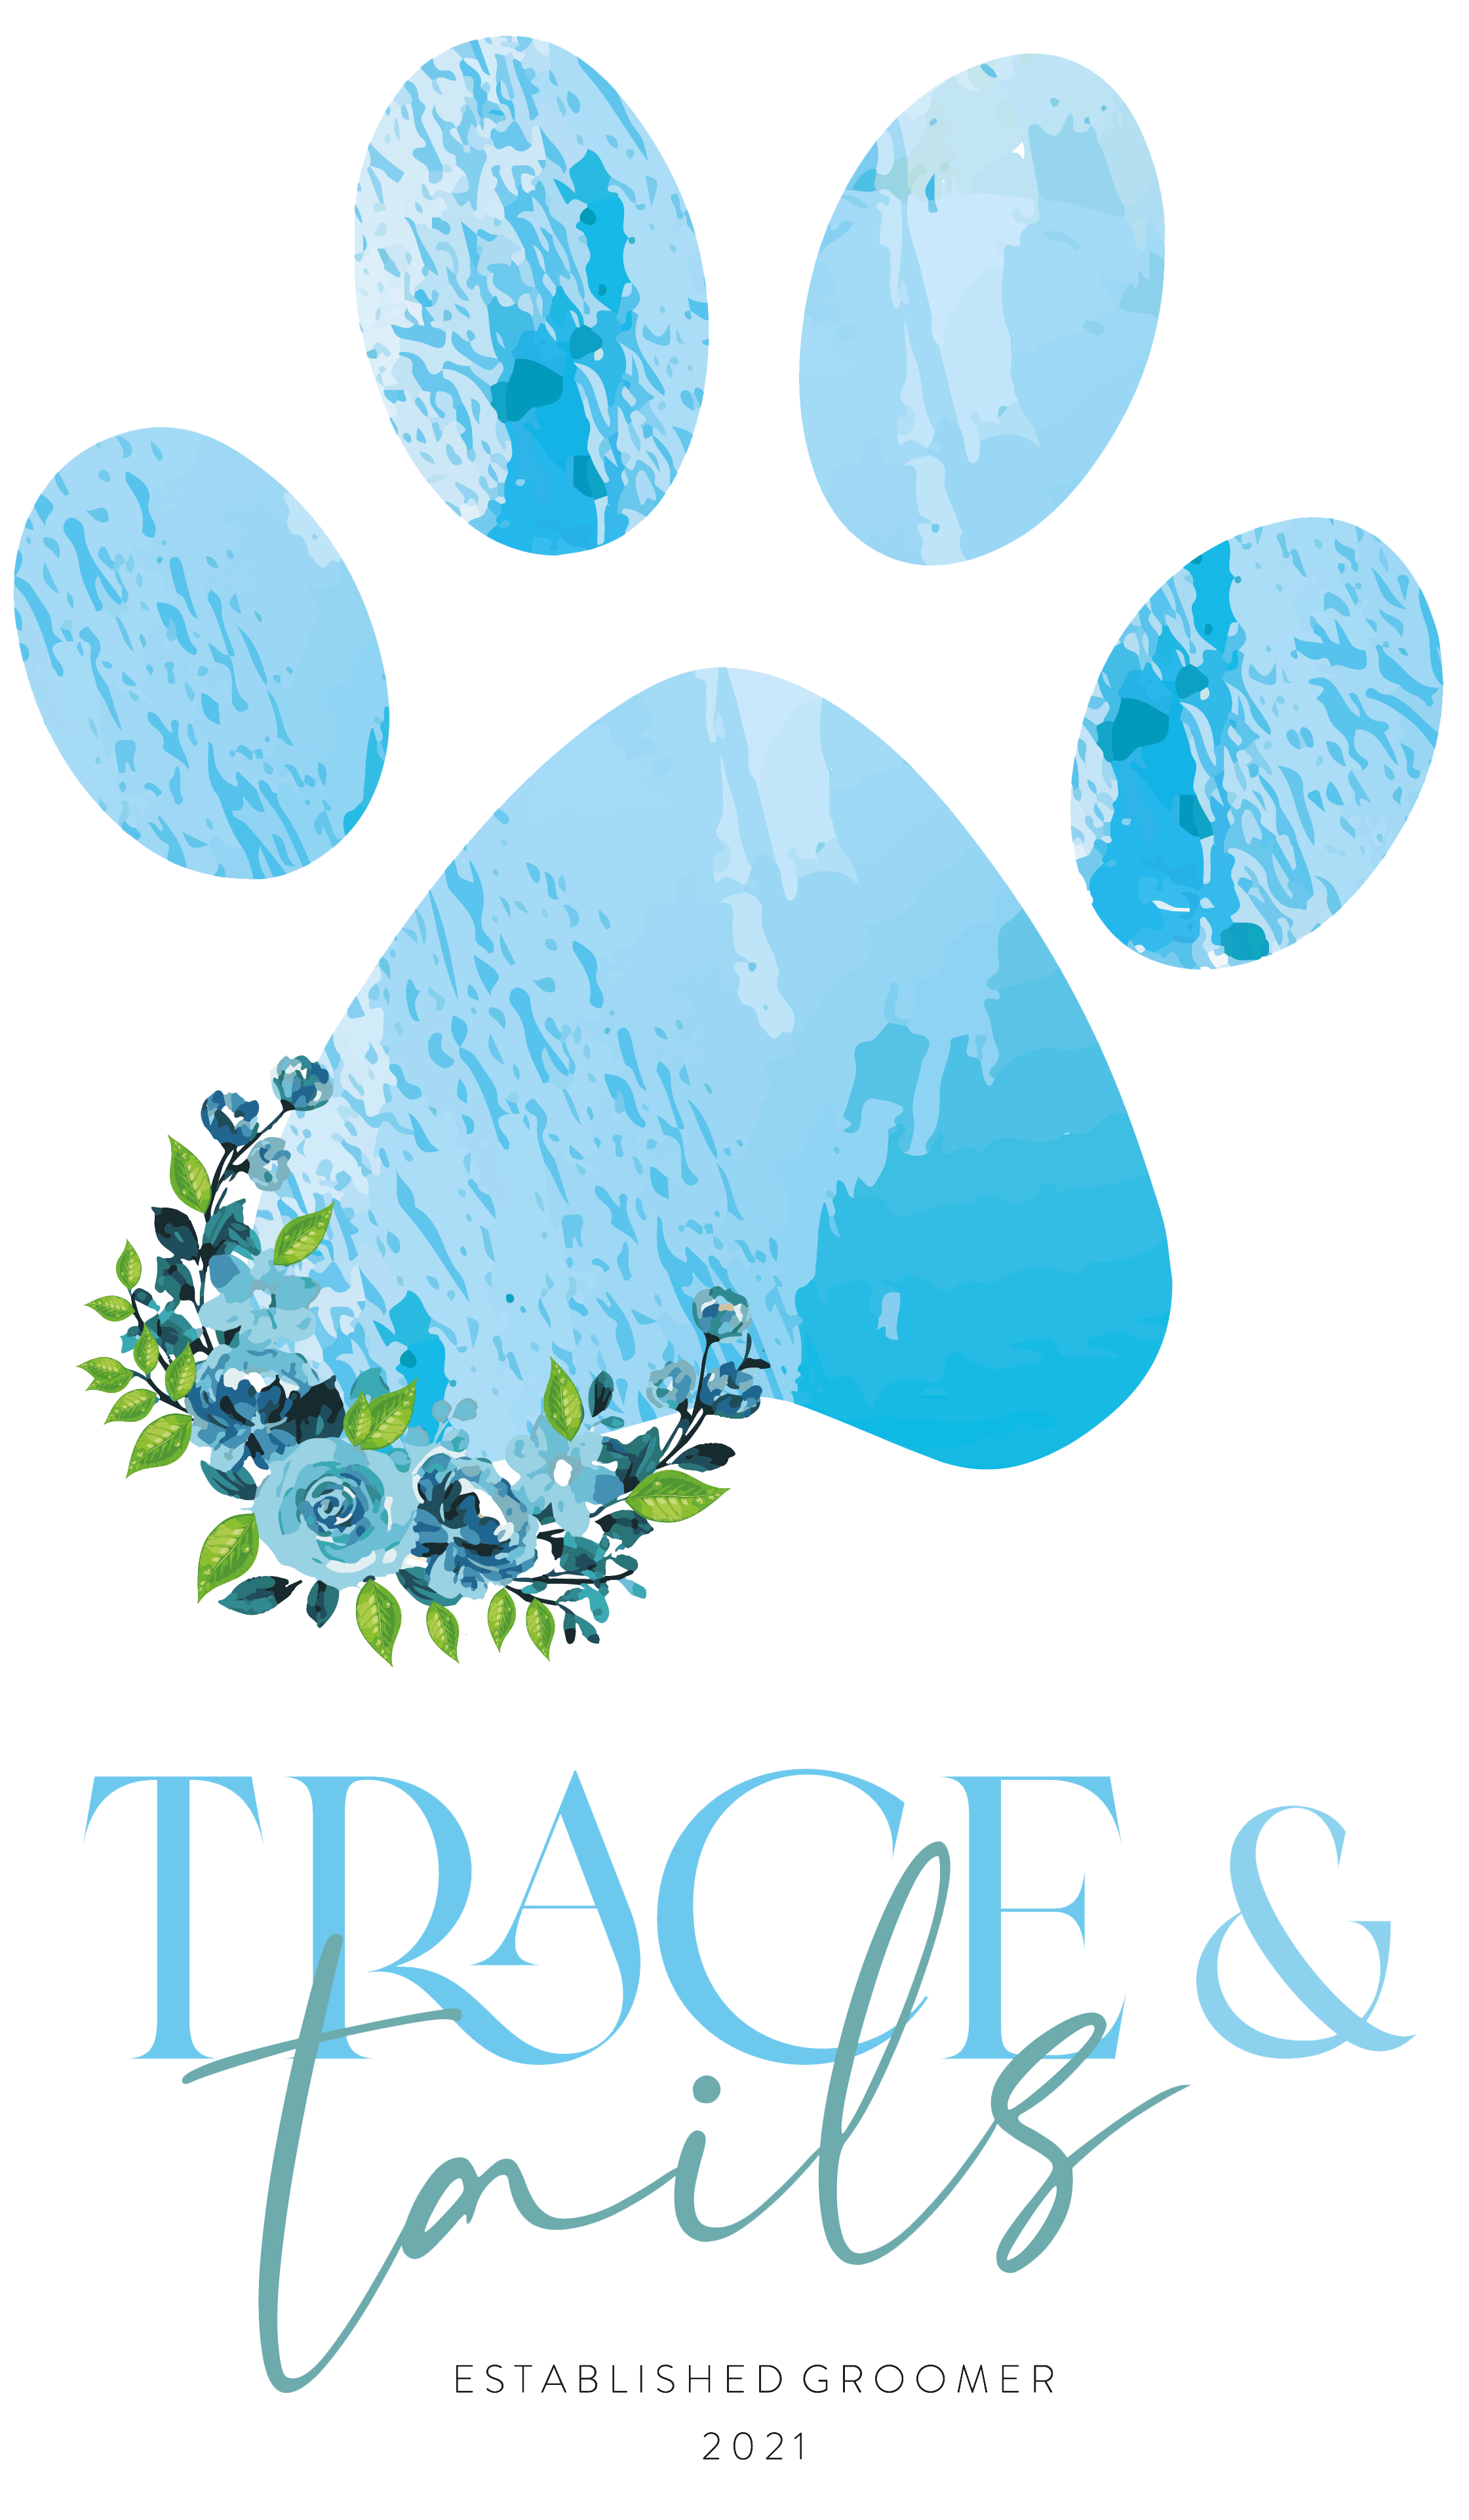 Trace & Tails